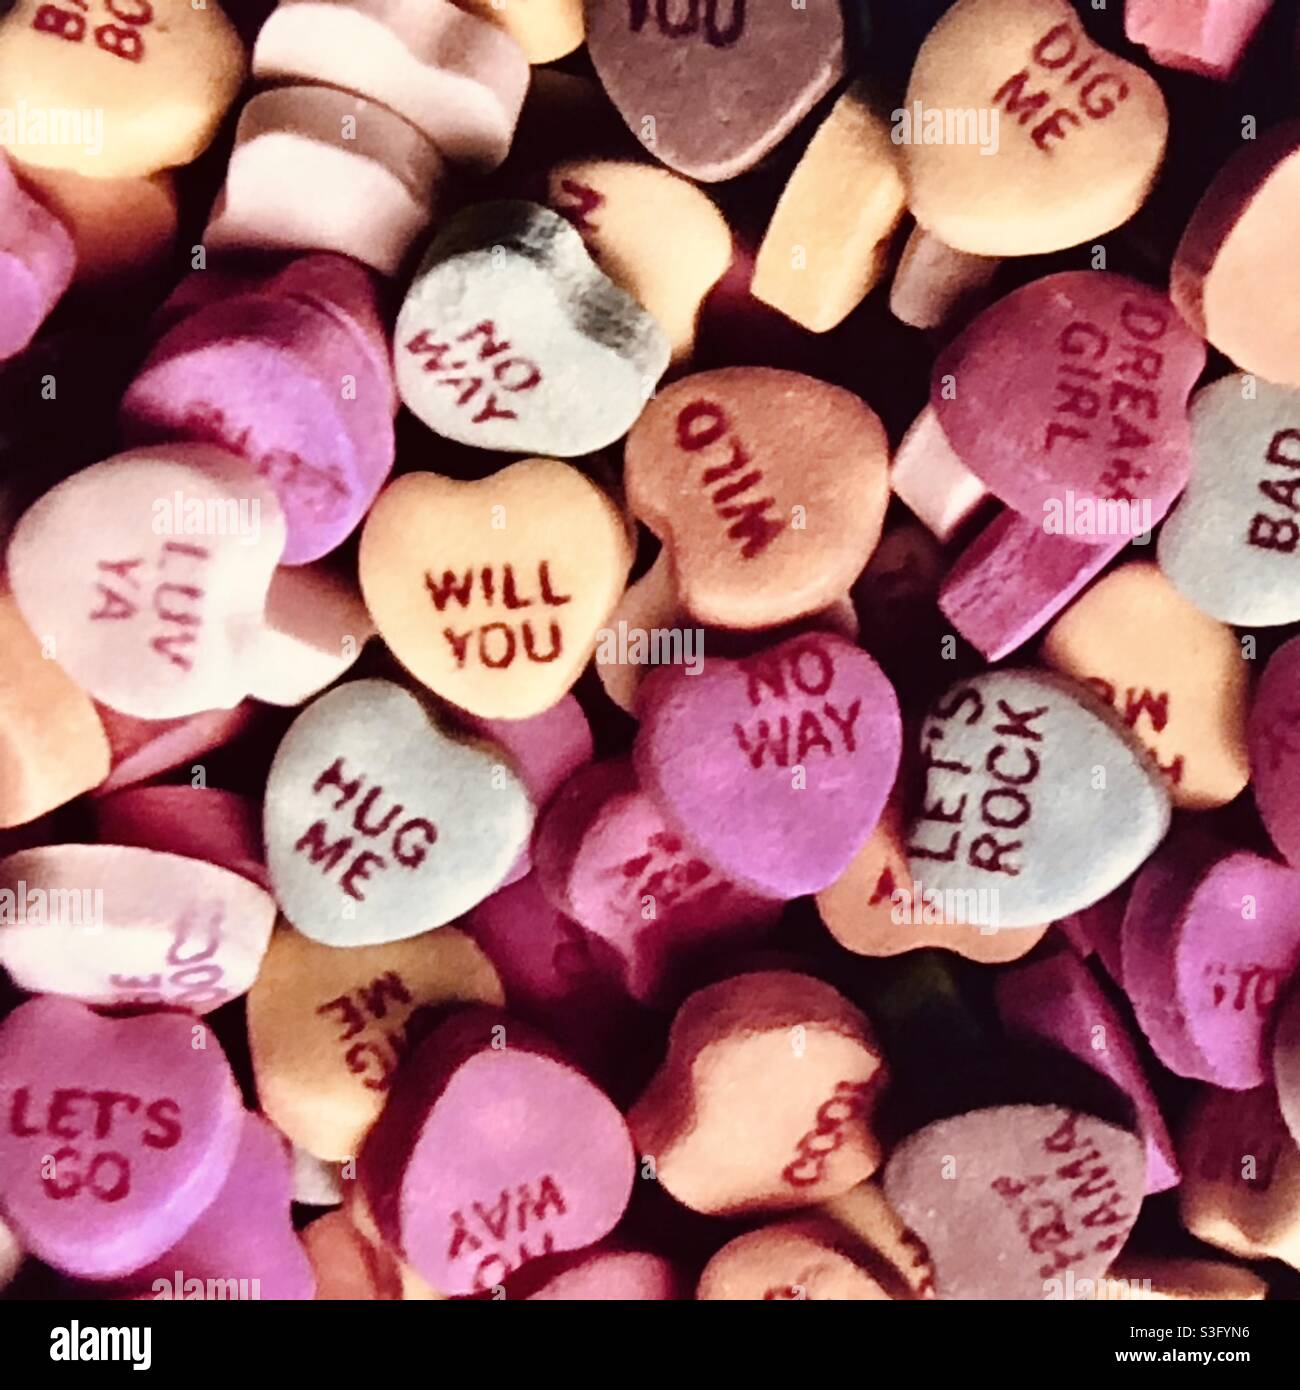 Candy hearts with messages Stock Photo